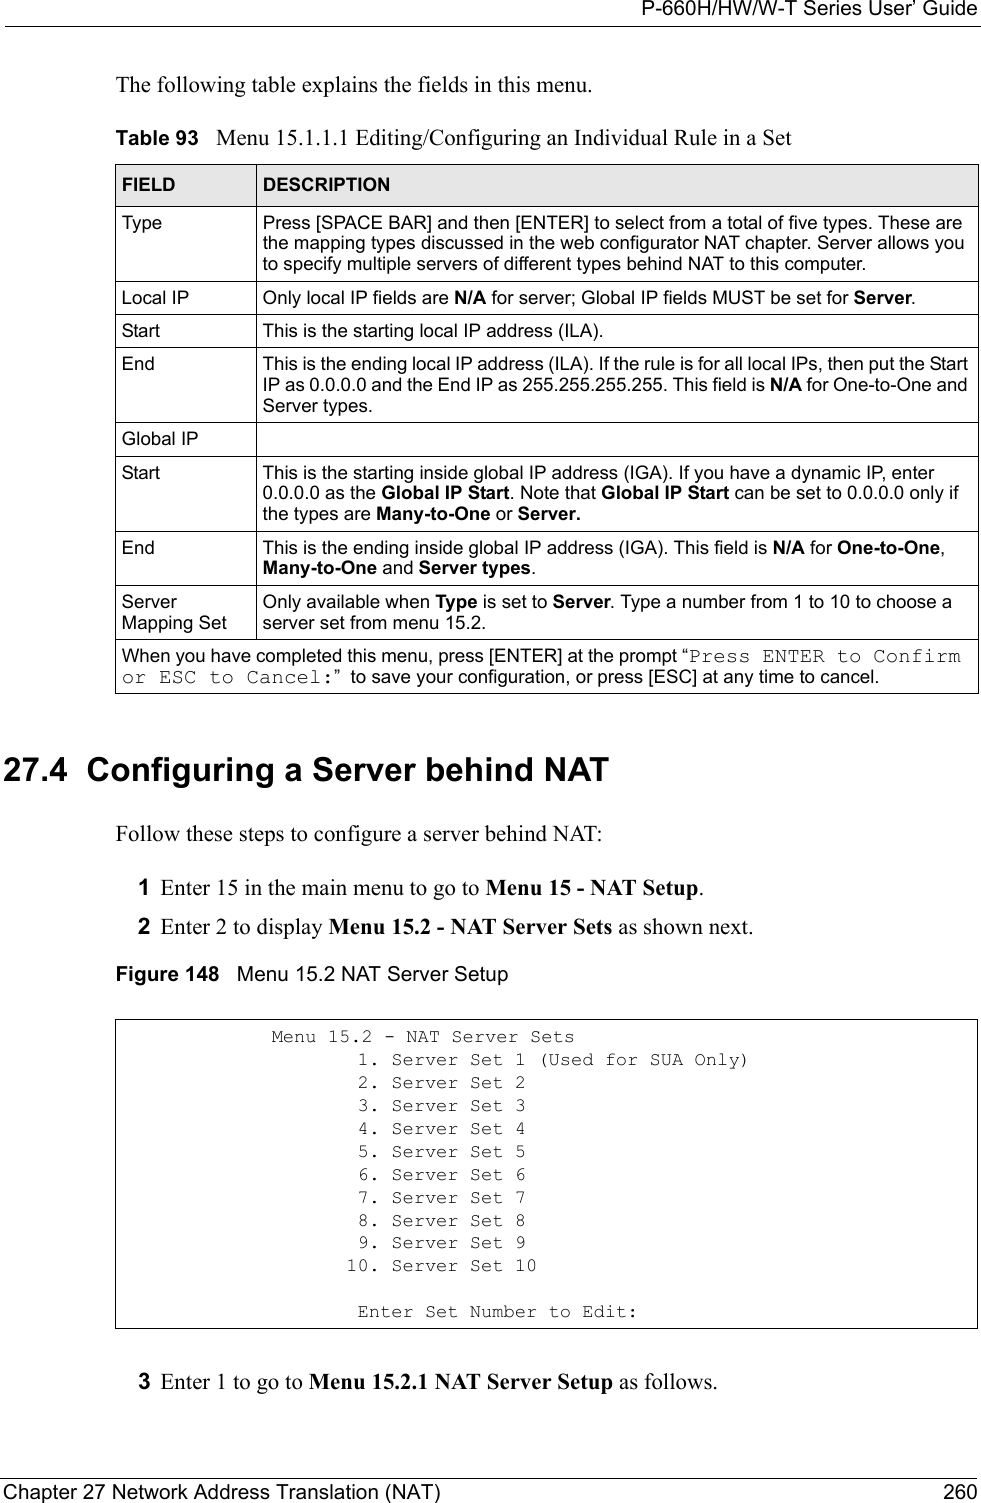 P-660H/HW/W-T Series User’ GuideChapter 27 Network Address Translation (NAT) 260The following table explains the fields in this menu.27.4  Configuring a Server behind NATFollow these steps to configure a server behind NAT:1Enter 15 in the main menu to go to Menu 15 - NAT Setup.2Enter 2 to display Menu 15.2 - NAT Server Sets as shown next.Figure 148   Menu 15.2 NAT Server Setup3Enter 1 to go to Menu 15.2.1 NAT Server Setup as follows.Table 93   Menu 15.1.1.1 Editing/Configuring an Individual Rule in a SetFIELD DESCRIPTIONType Press [SPACE BAR] and then [ENTER] to select from a total of five types. These are the mapping types discussed in the web configurator NAT chapter. Server allows you to specify multiple servers of different types behind NAT to this computer.Local IP Only local IP fields are N/A for server; Global IP fields MUST be set for Server.Start This is the starting local IP address (ILA).End This is the ending local IP address (ILA). If the rule is for all local IPs, then put the Start IP as 0.0.0.0 and the End IP as 255.255.255.255. This field is N/A for One-to-One and Server types.Global IPStart This is the starting inside global IP address (IGA). If you have a dynamic IP, enter 0.0.0.0 as the Global IP Start. Note that Global IP Start can be set to 0.0.0.0 only if the types are Many-to-One or Server.End This is the ending inside global IP address (IGA). This field is N/A for One-to-One, Many-to-One and Server types.Server Mapping SetOnly available when Type is set to Server. Type a number from 1 to 10 to choose a server set from menu 15.2.When you have completed this menu, press [ENTER] at the prompt “Press ENTER to Confirm or ESC to Cancel:”  to save your configuration, or press [ESC] at any time to cancel.Menu 15.2 - NAT Server Sets                     1. Server Set 1 (Used for SUA Only)                     2. Server Set 2                     3. Server Set 3                     4. Server Set 4                     5. Server Set 5                     6. Server Set 6                     7. Server Set 7                     8. Server Set 8                     9. Server Set 9                    10. Server Set 10                     Enter Set Number to Edit: